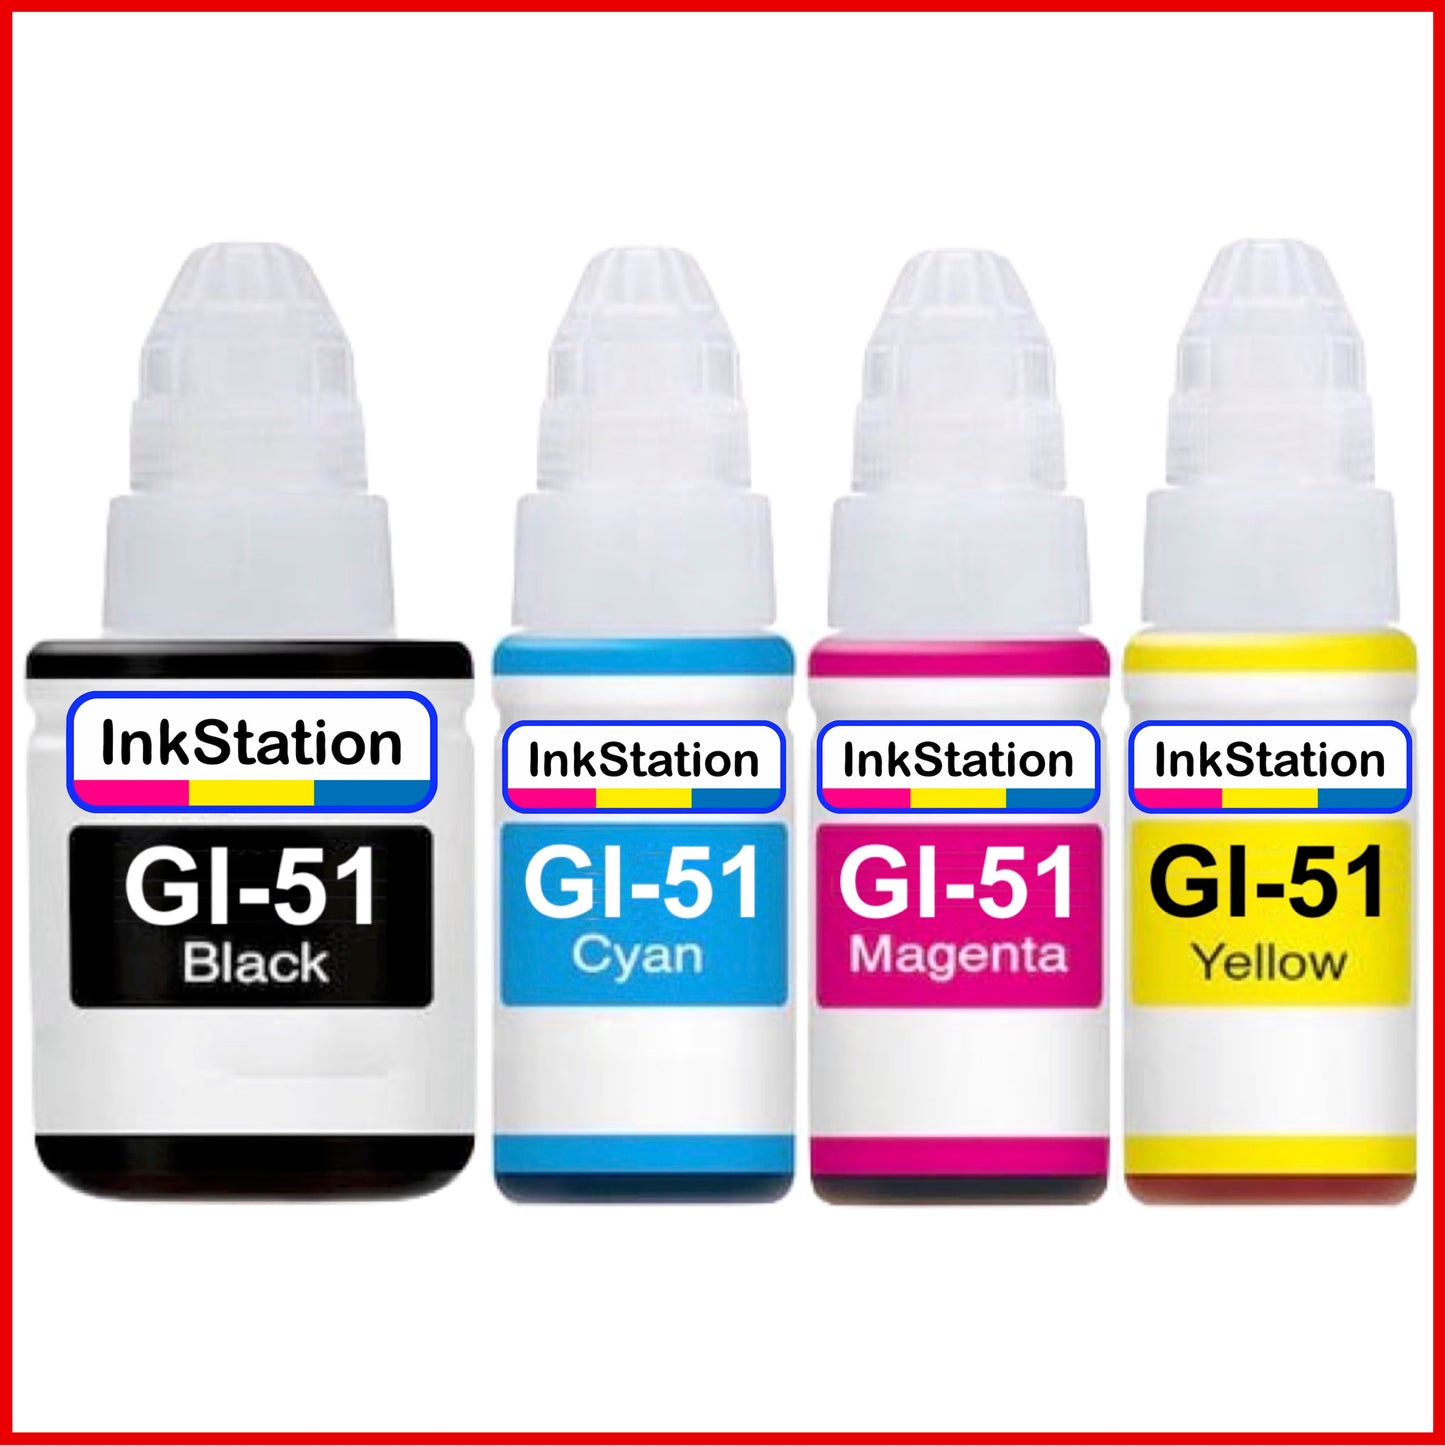 Compatible Multipack of Ink Bottles for GI-51 Canon Pixma (135/70ml) B/C/M/Y